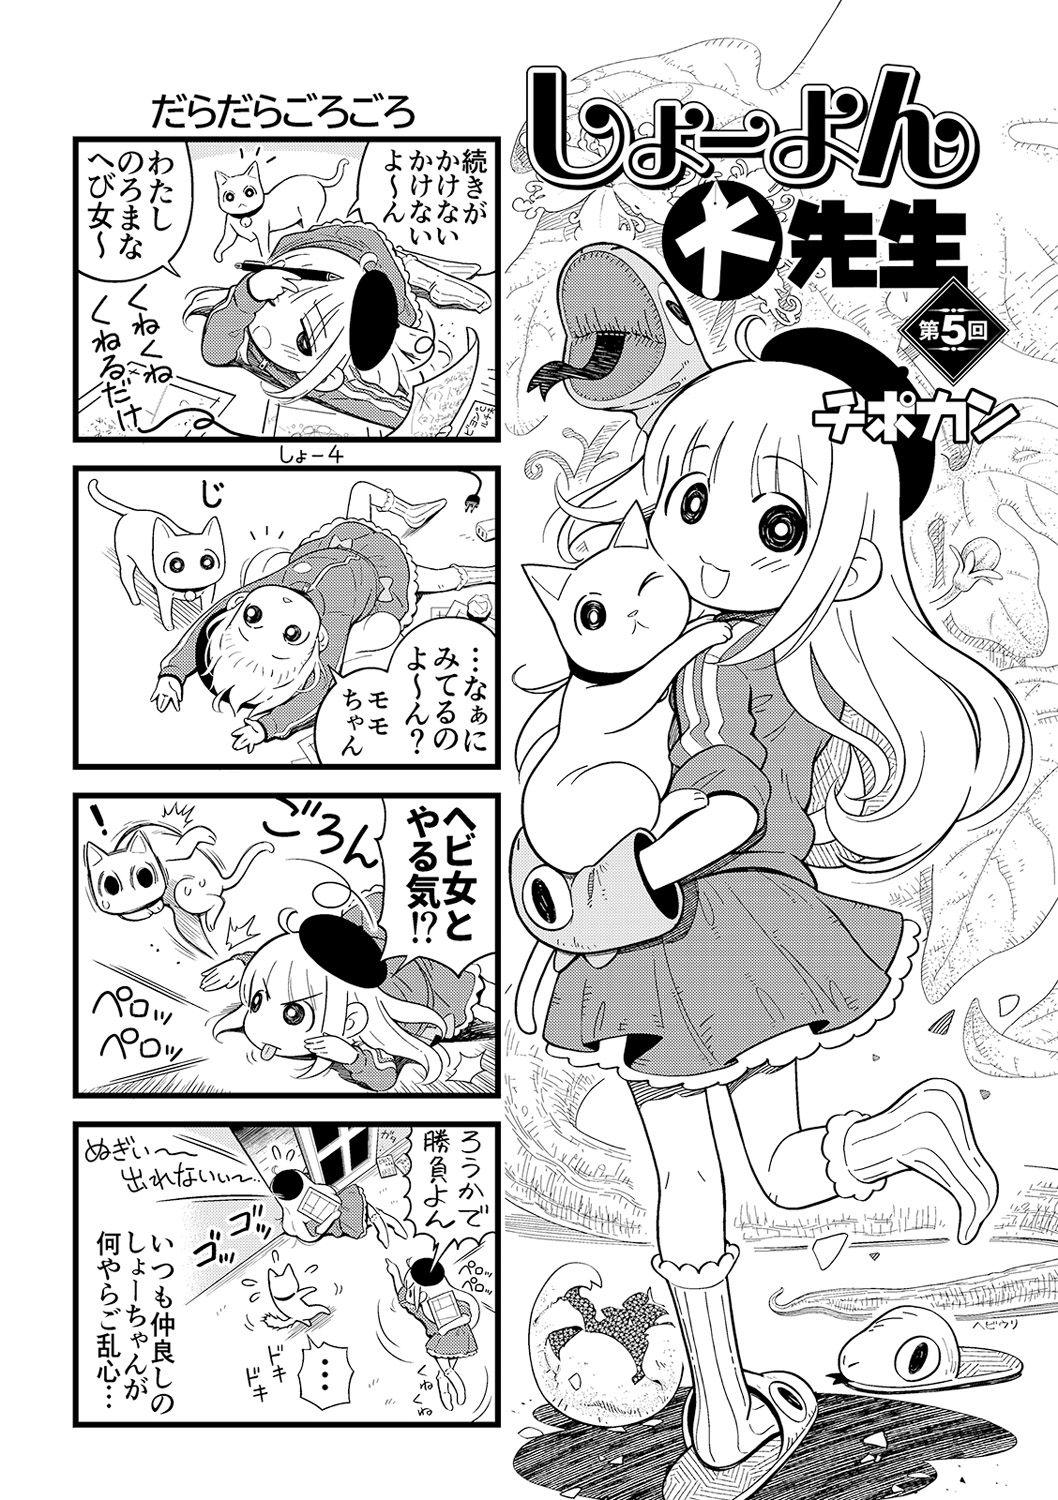 Oldvsyoung COMIC Mate Legend Vol. 33 2020-06 Online - Page 255